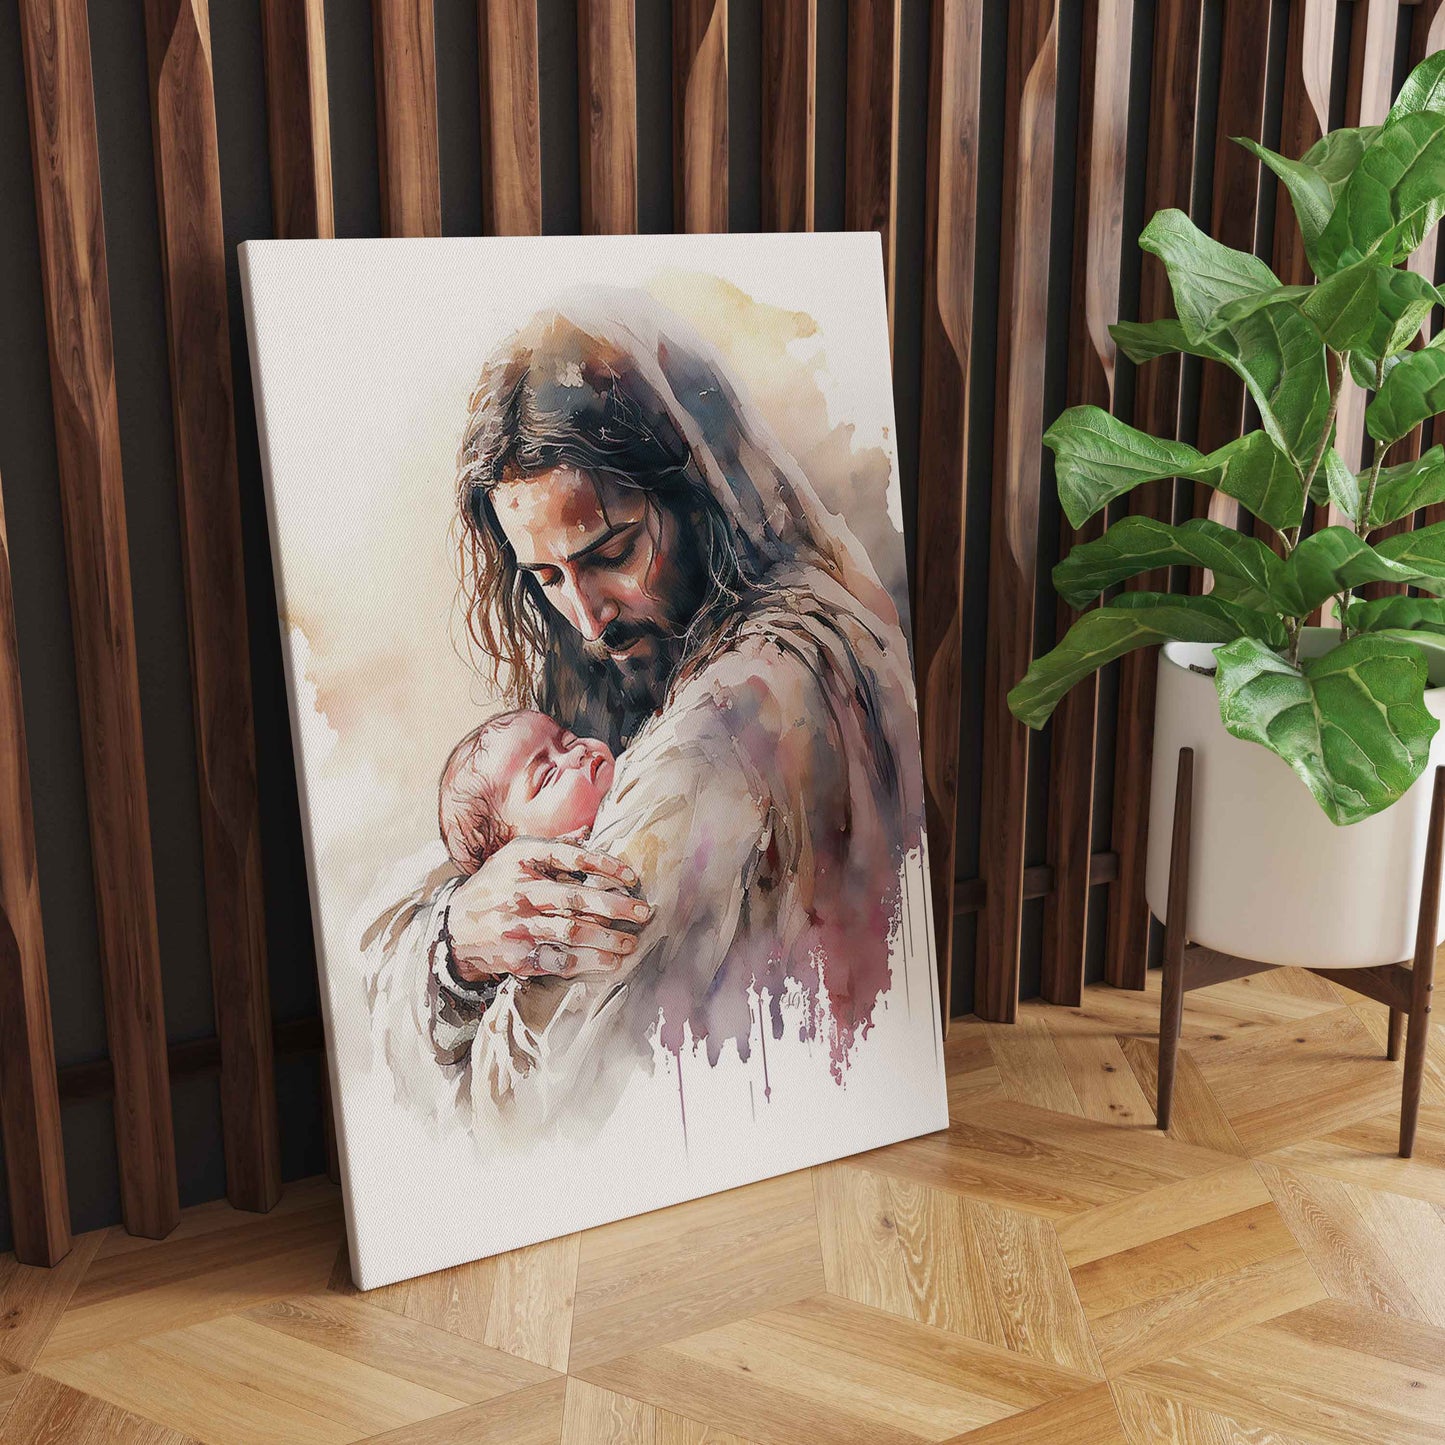 Tender Love: Heartwarming Wall Art of Jesus Holding a Baby - Embrace the Divine Bond of Compassion and Innocence - S05E32